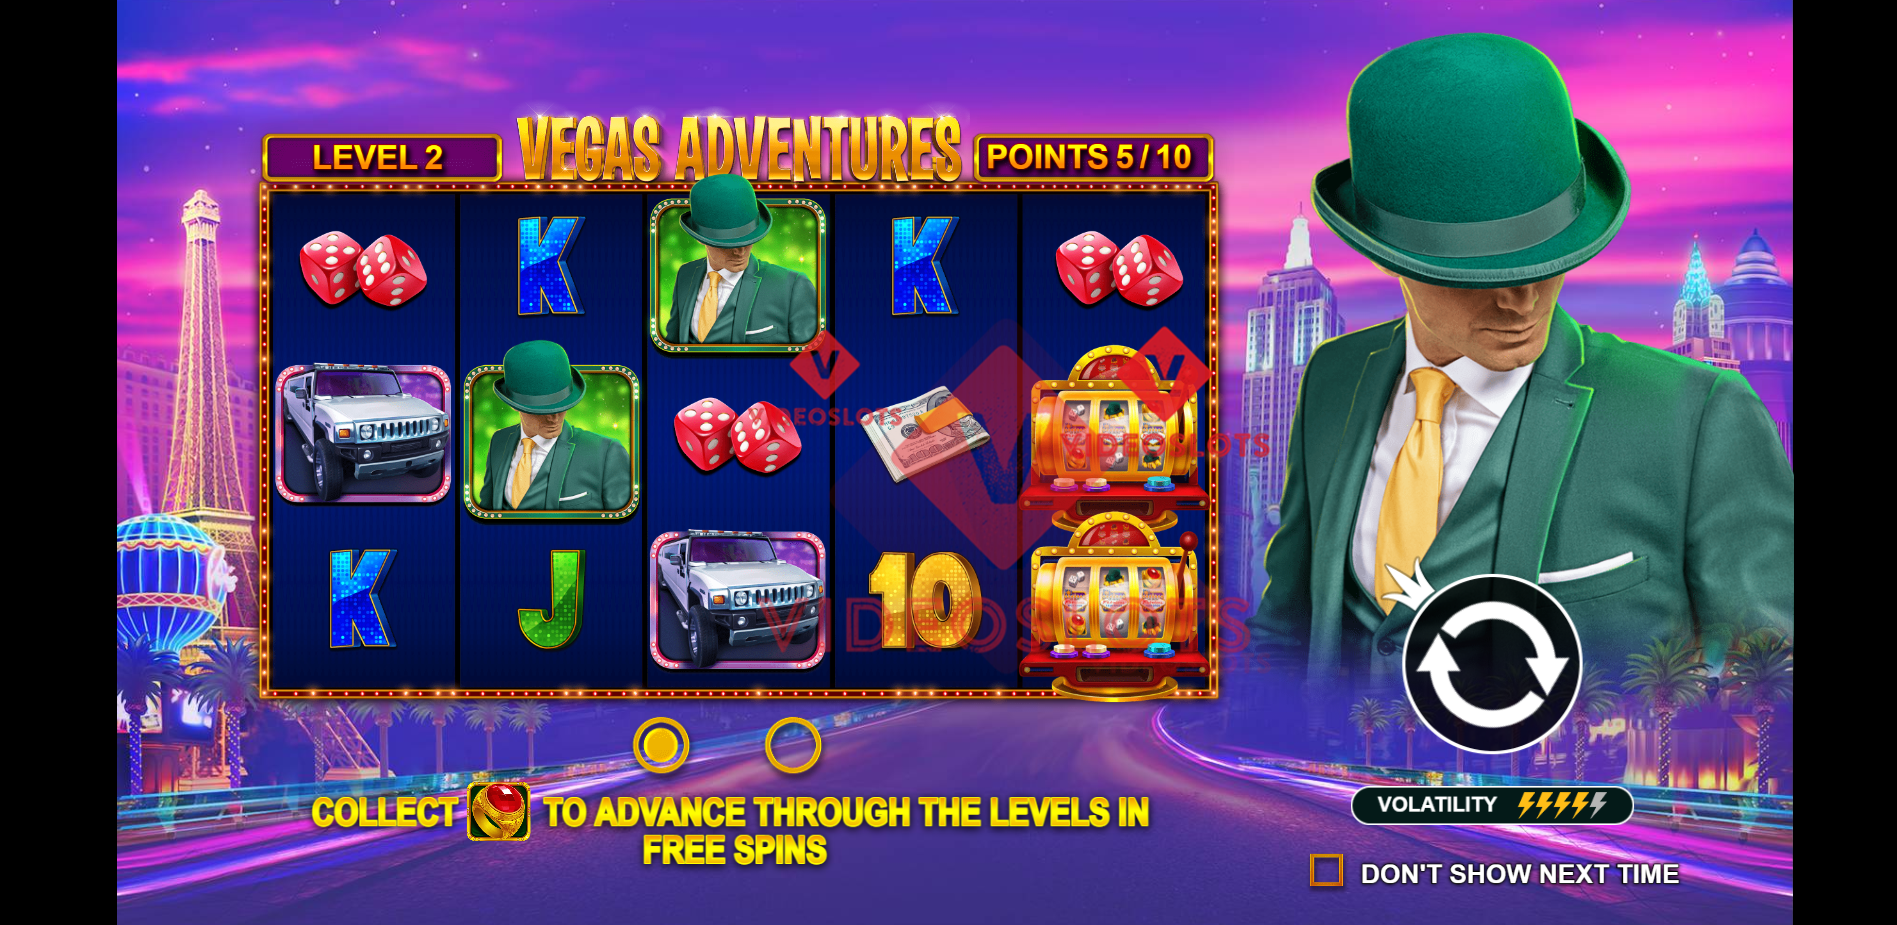 Game Intro for Vegas Adventures slot by Pragmatic Play